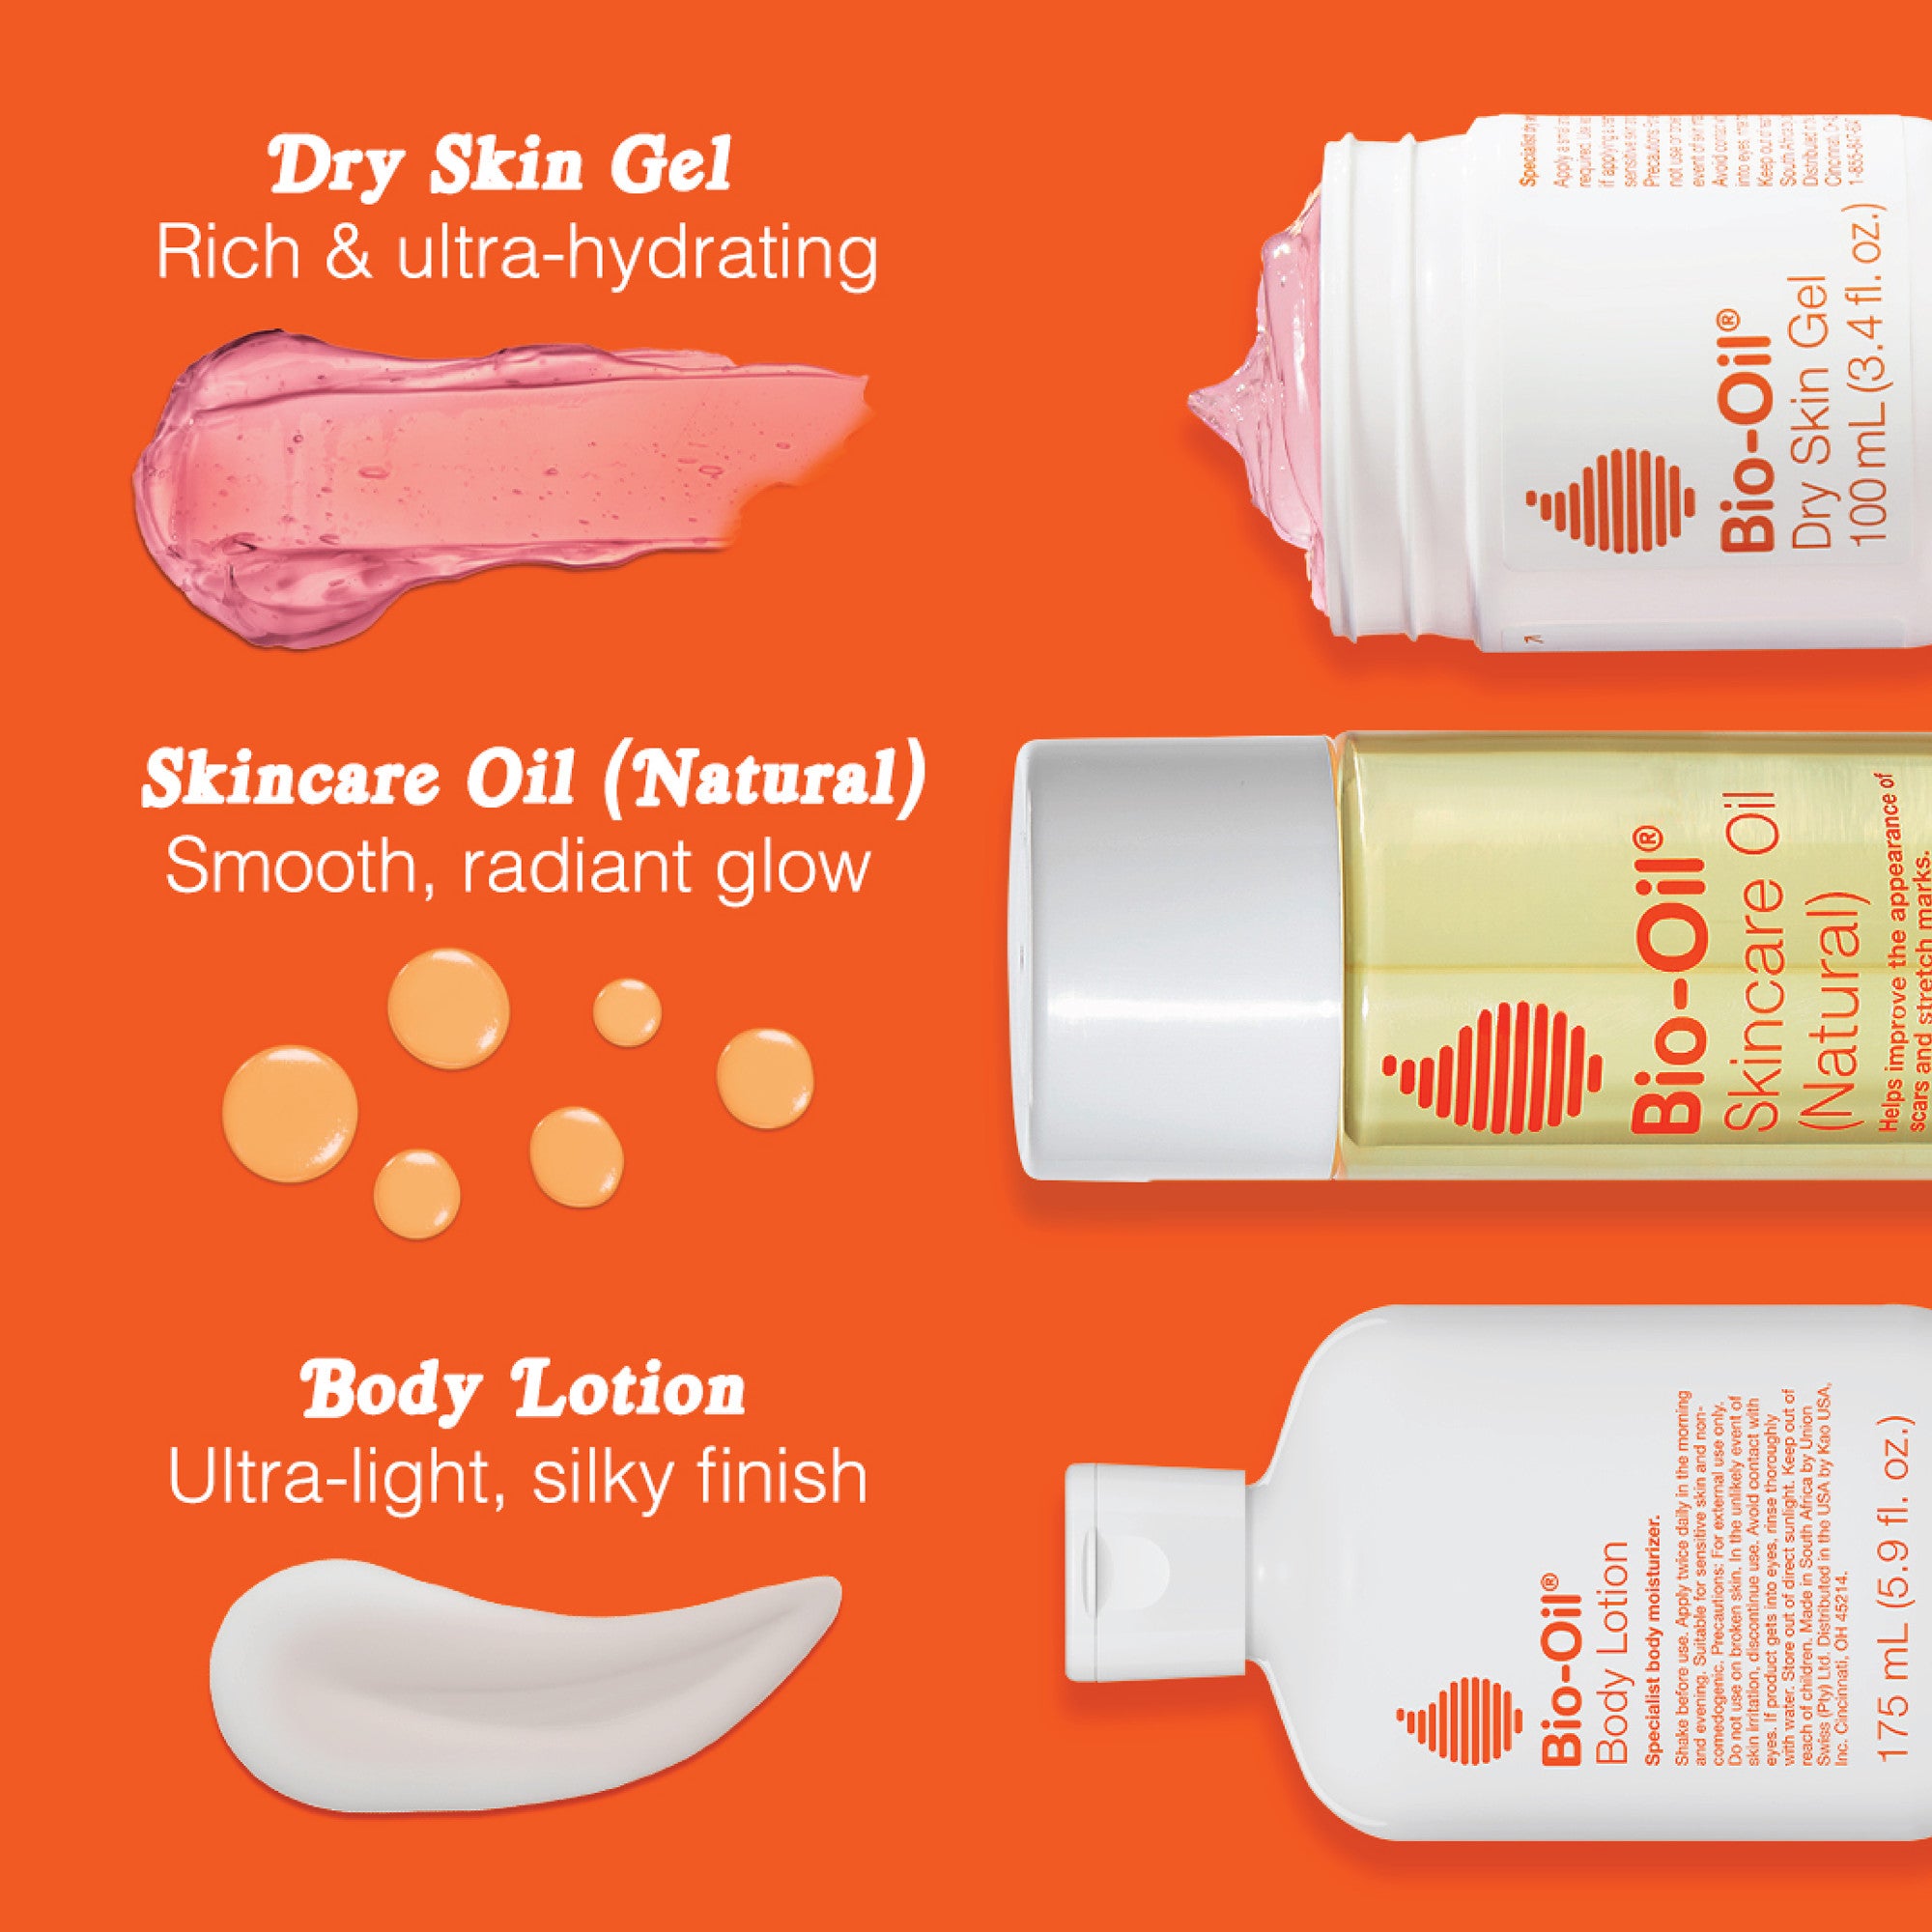 Dry Skin Gel: Rich and ultra hydrating. Skincare oil (Natural): Smooth, radiant glow. Body Lotion: Ultra-light, silky finish.